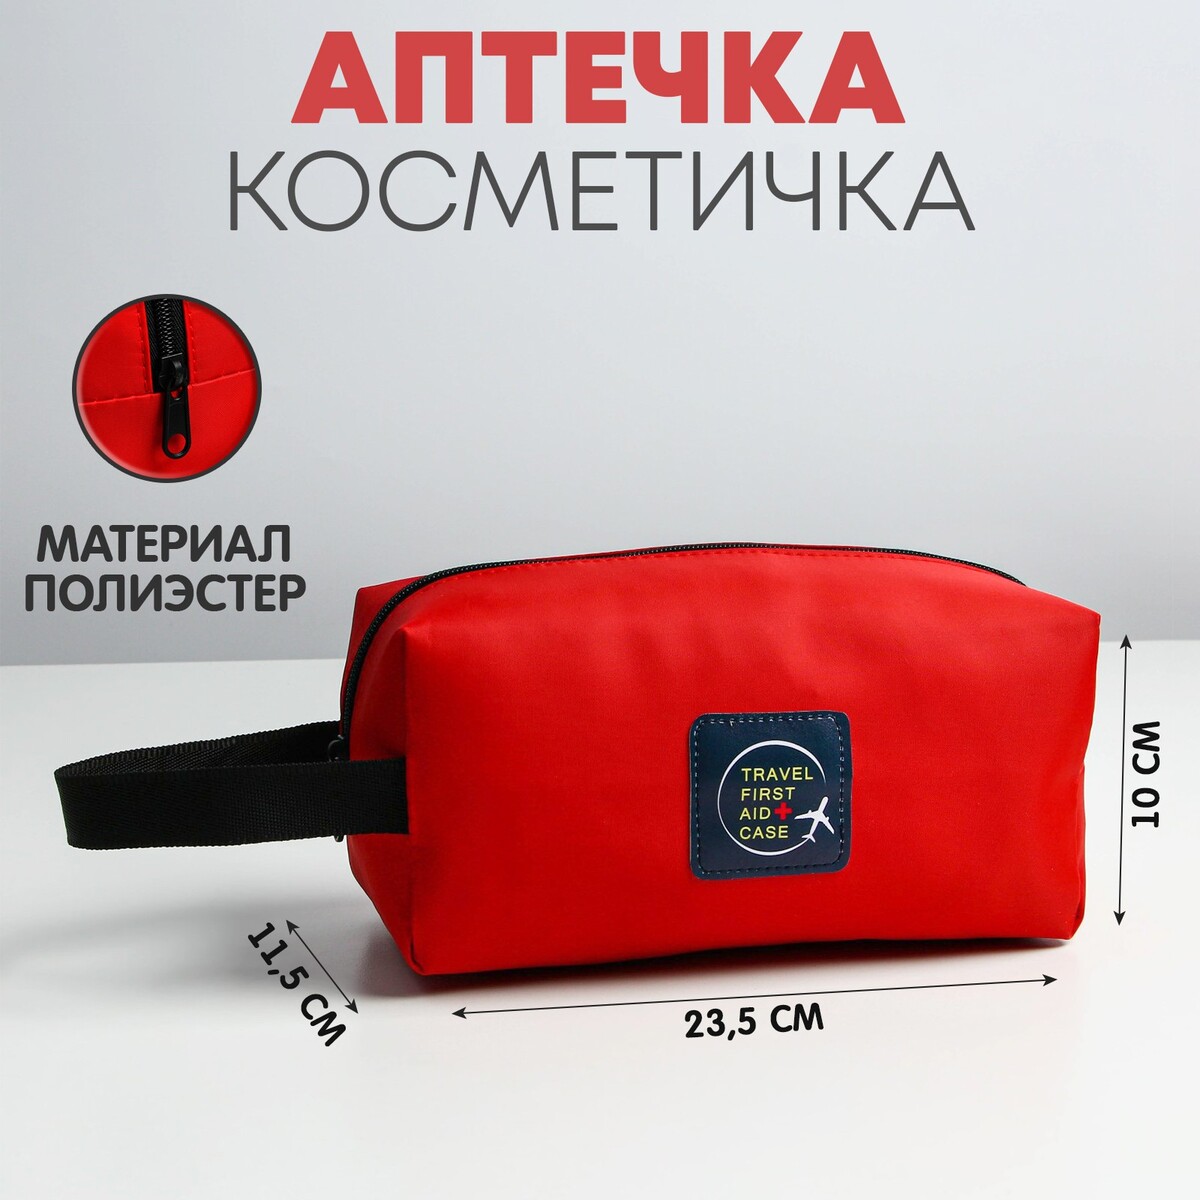   travel first aid case, 23.51011.5 